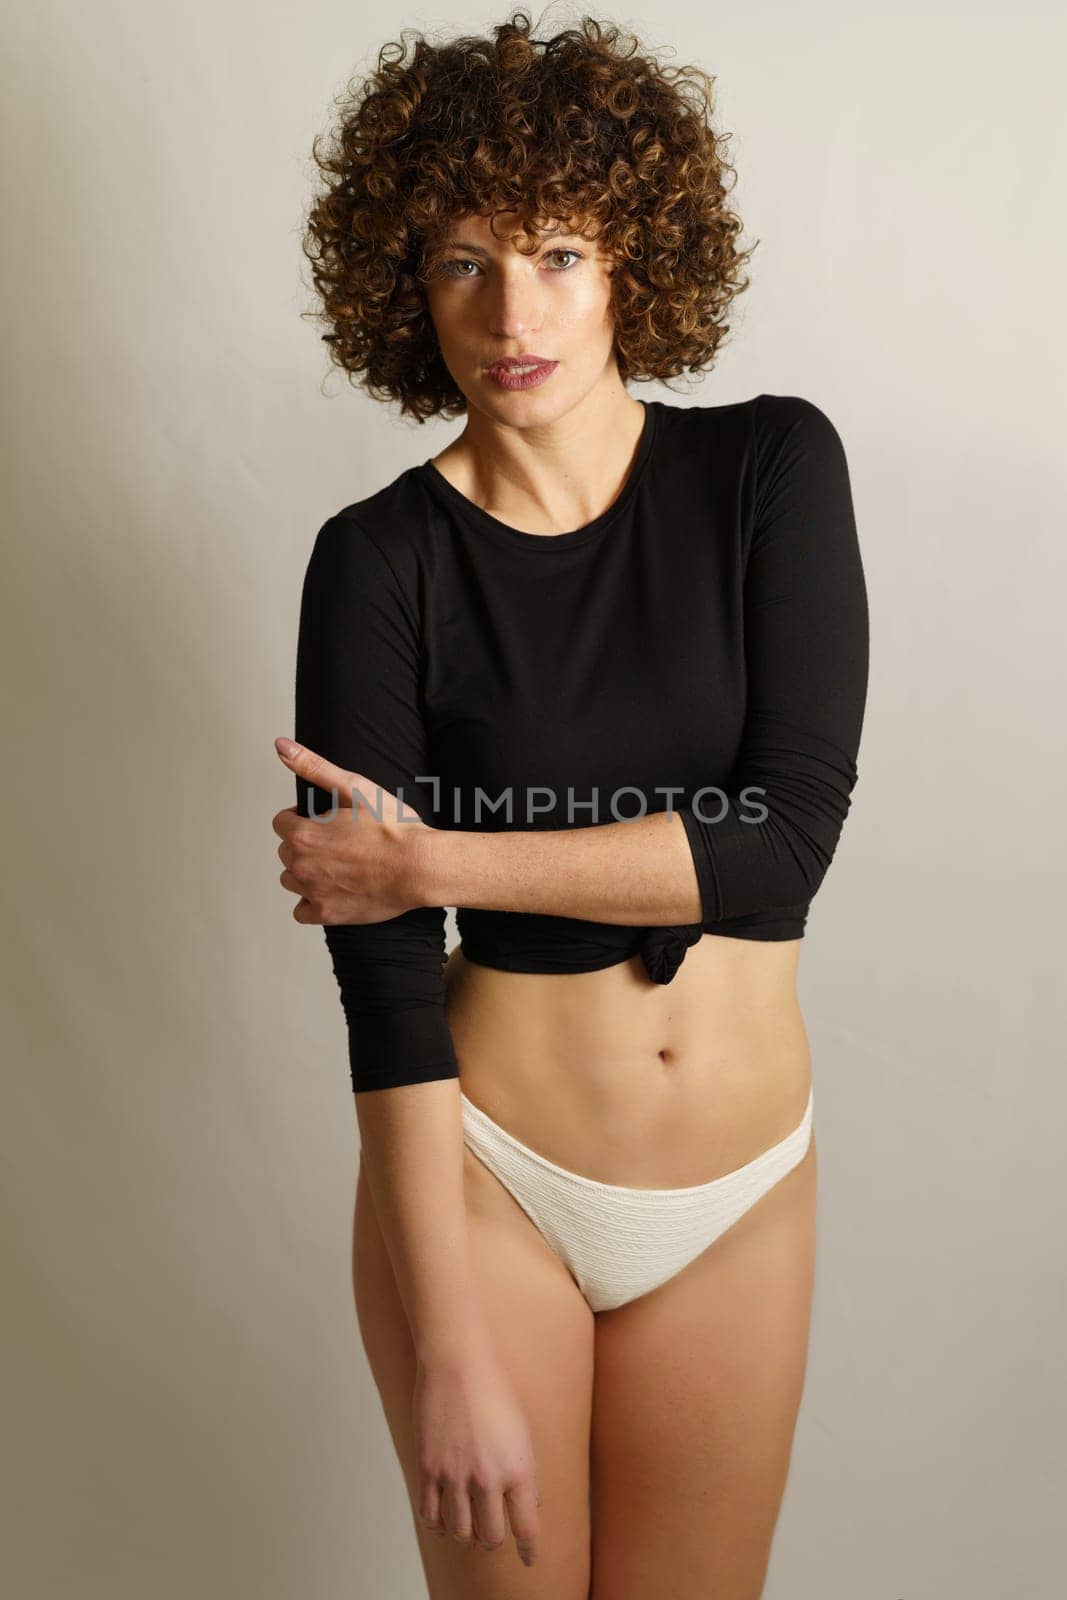 Smiling young slim female model with curly hair,standing with hand folded across chest and touching stretched down arm while looking at camera against gray background